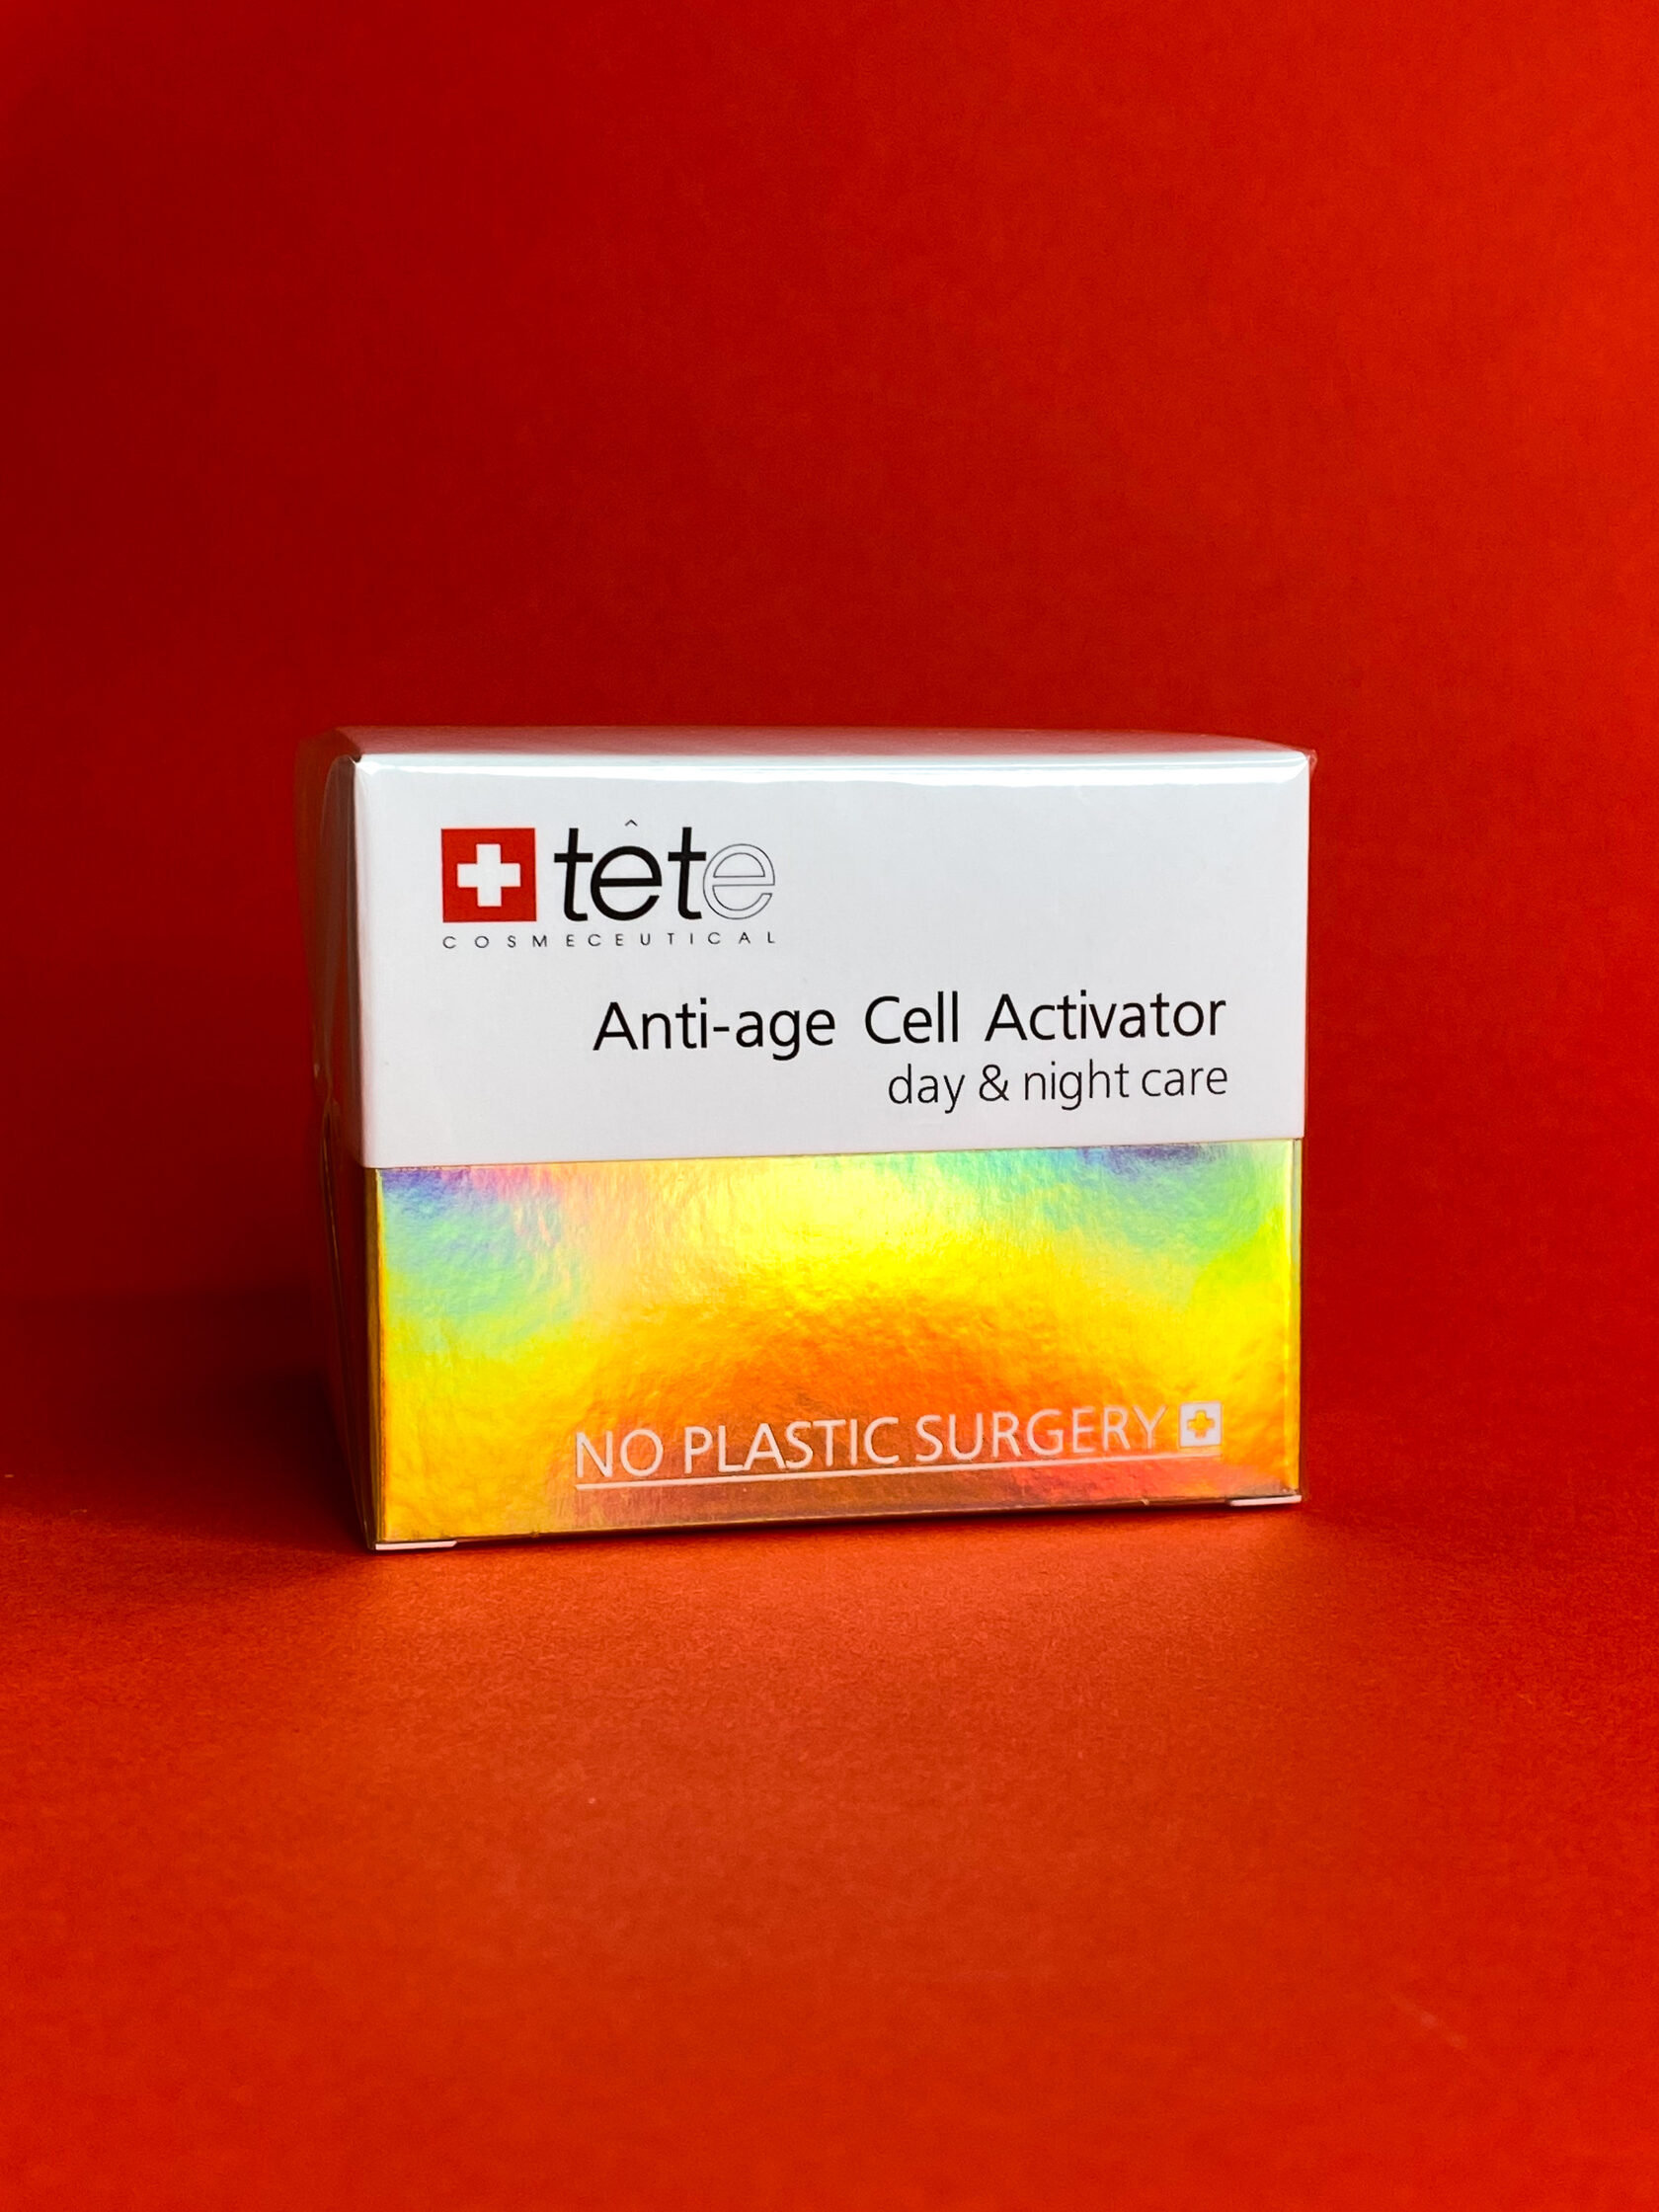 Anti age Cell Activator for Eyes tete 30. Дай активатор